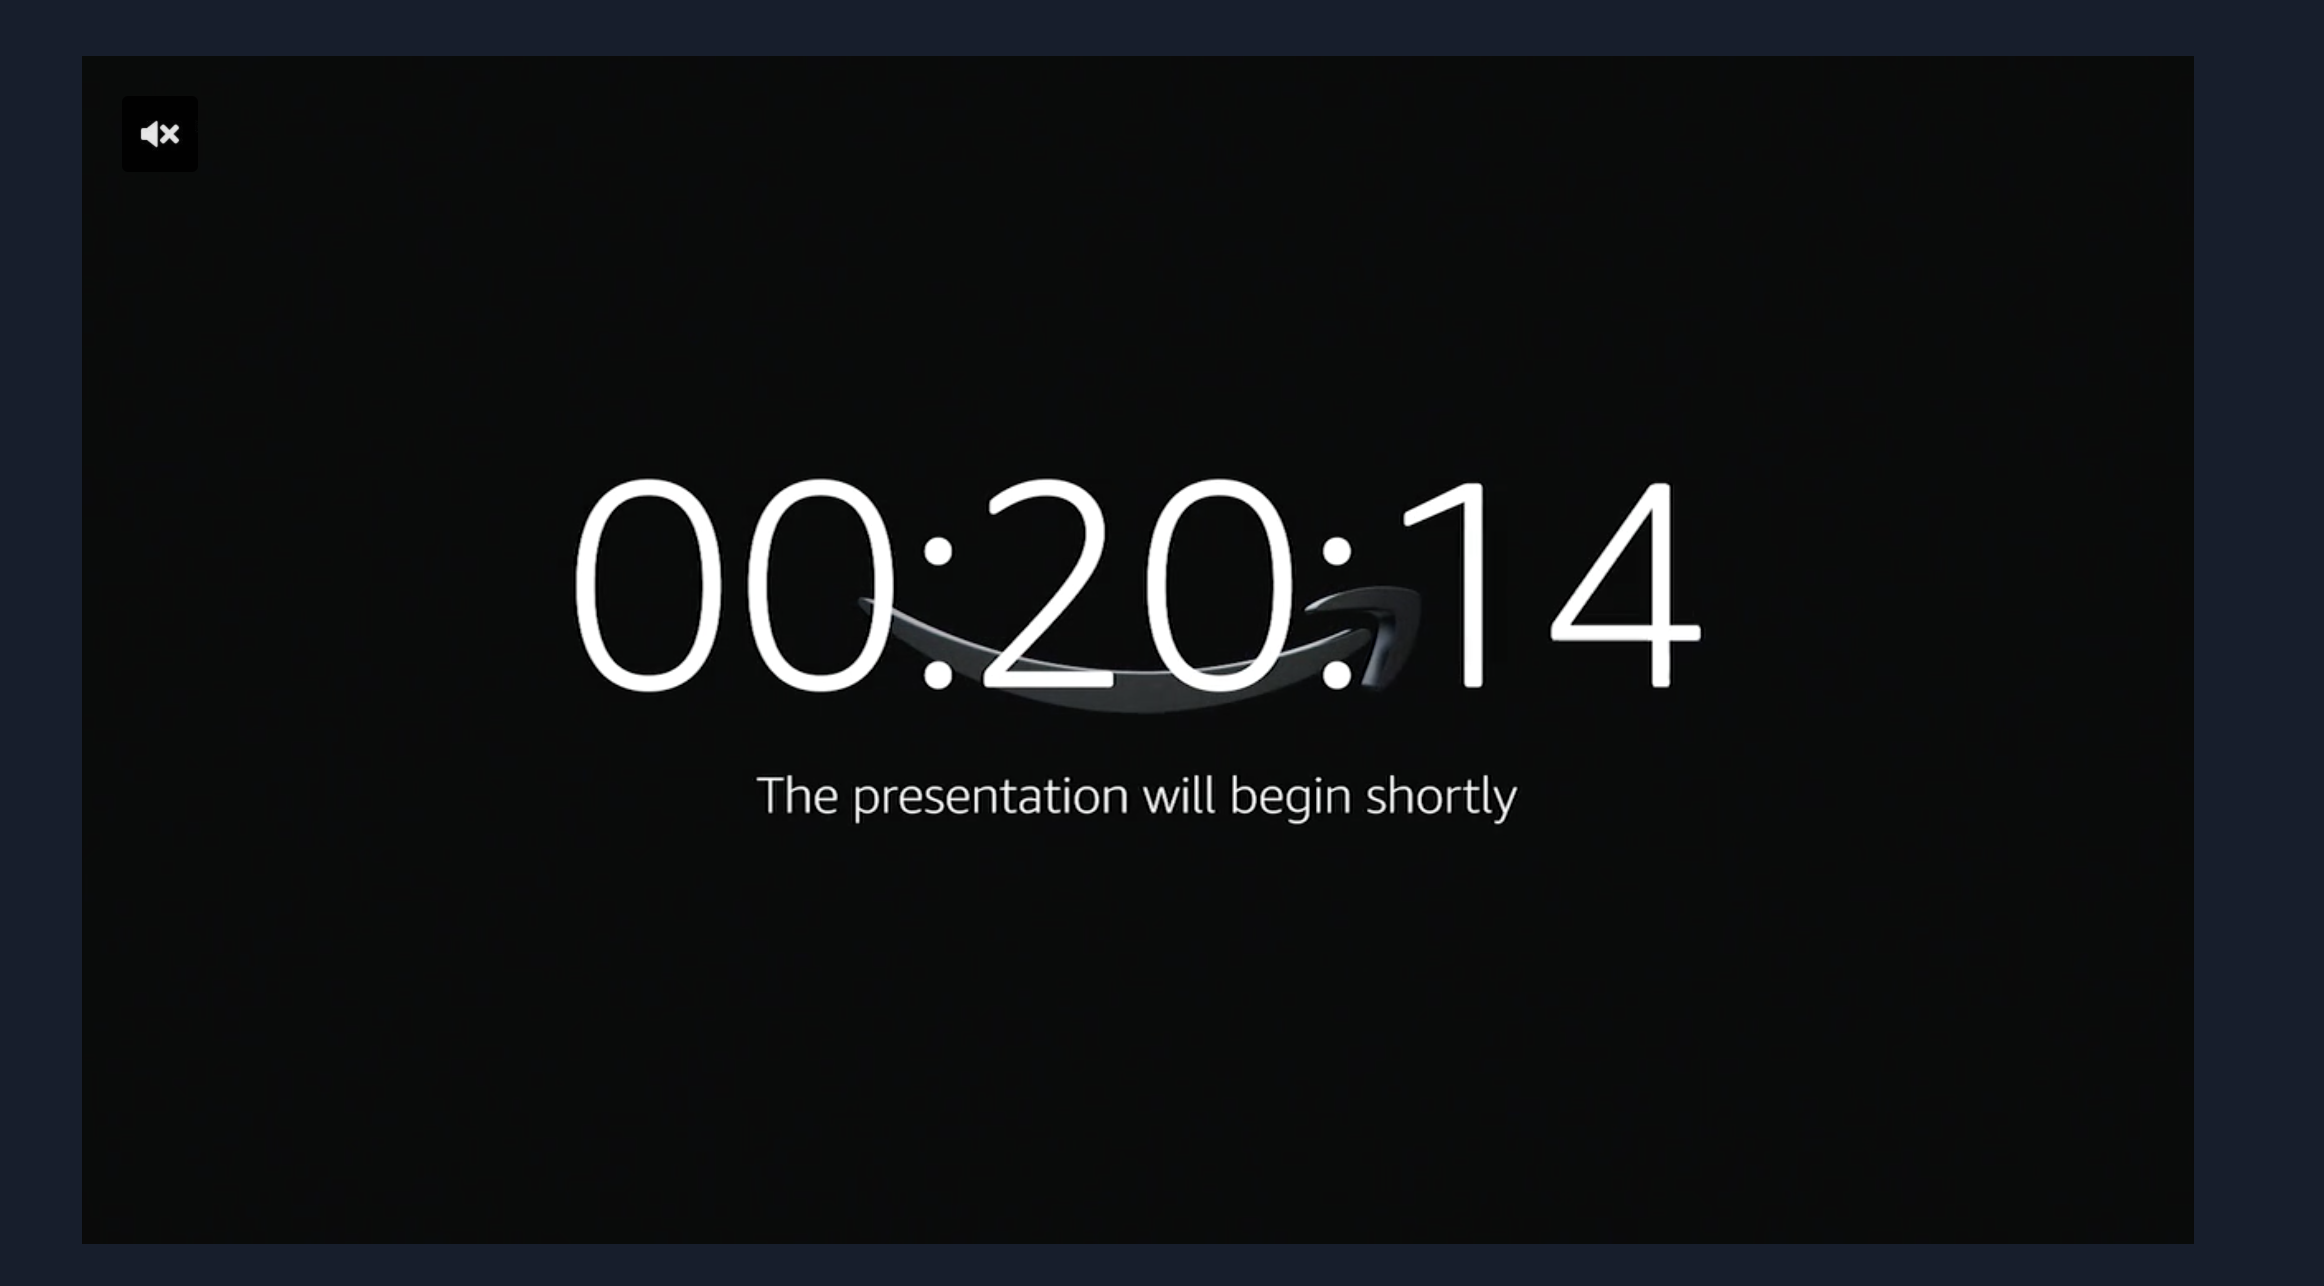 Amazon live event blog, countdown is activated!